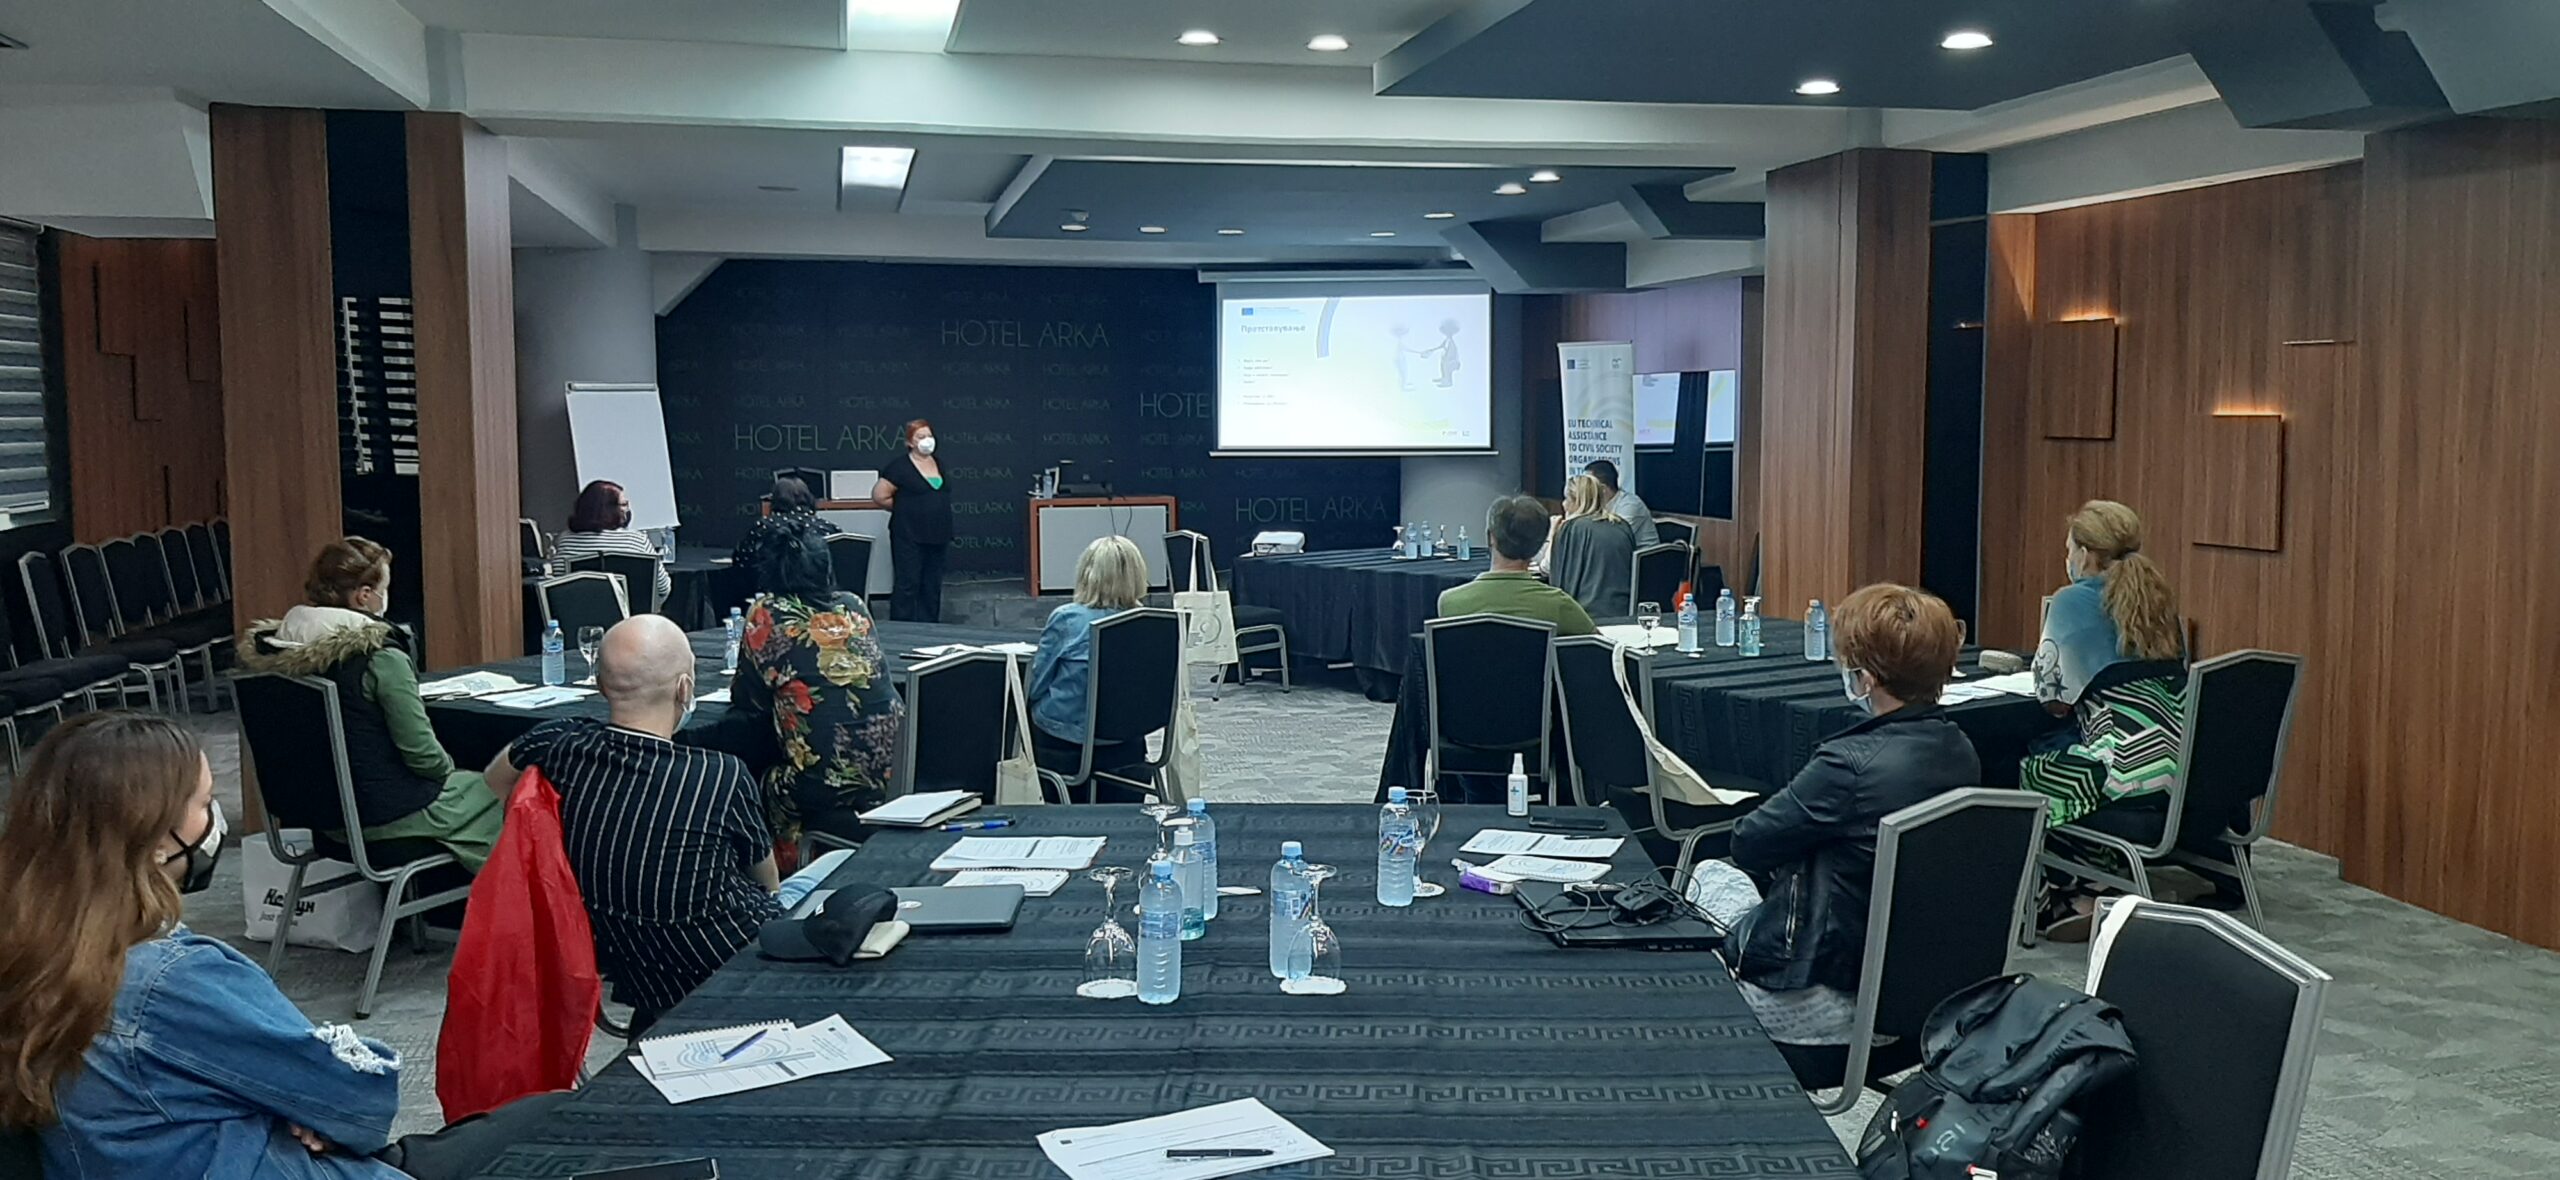 Strategic Development for CSOs through Monitoring, Evaluation and Learning in North Macedonia